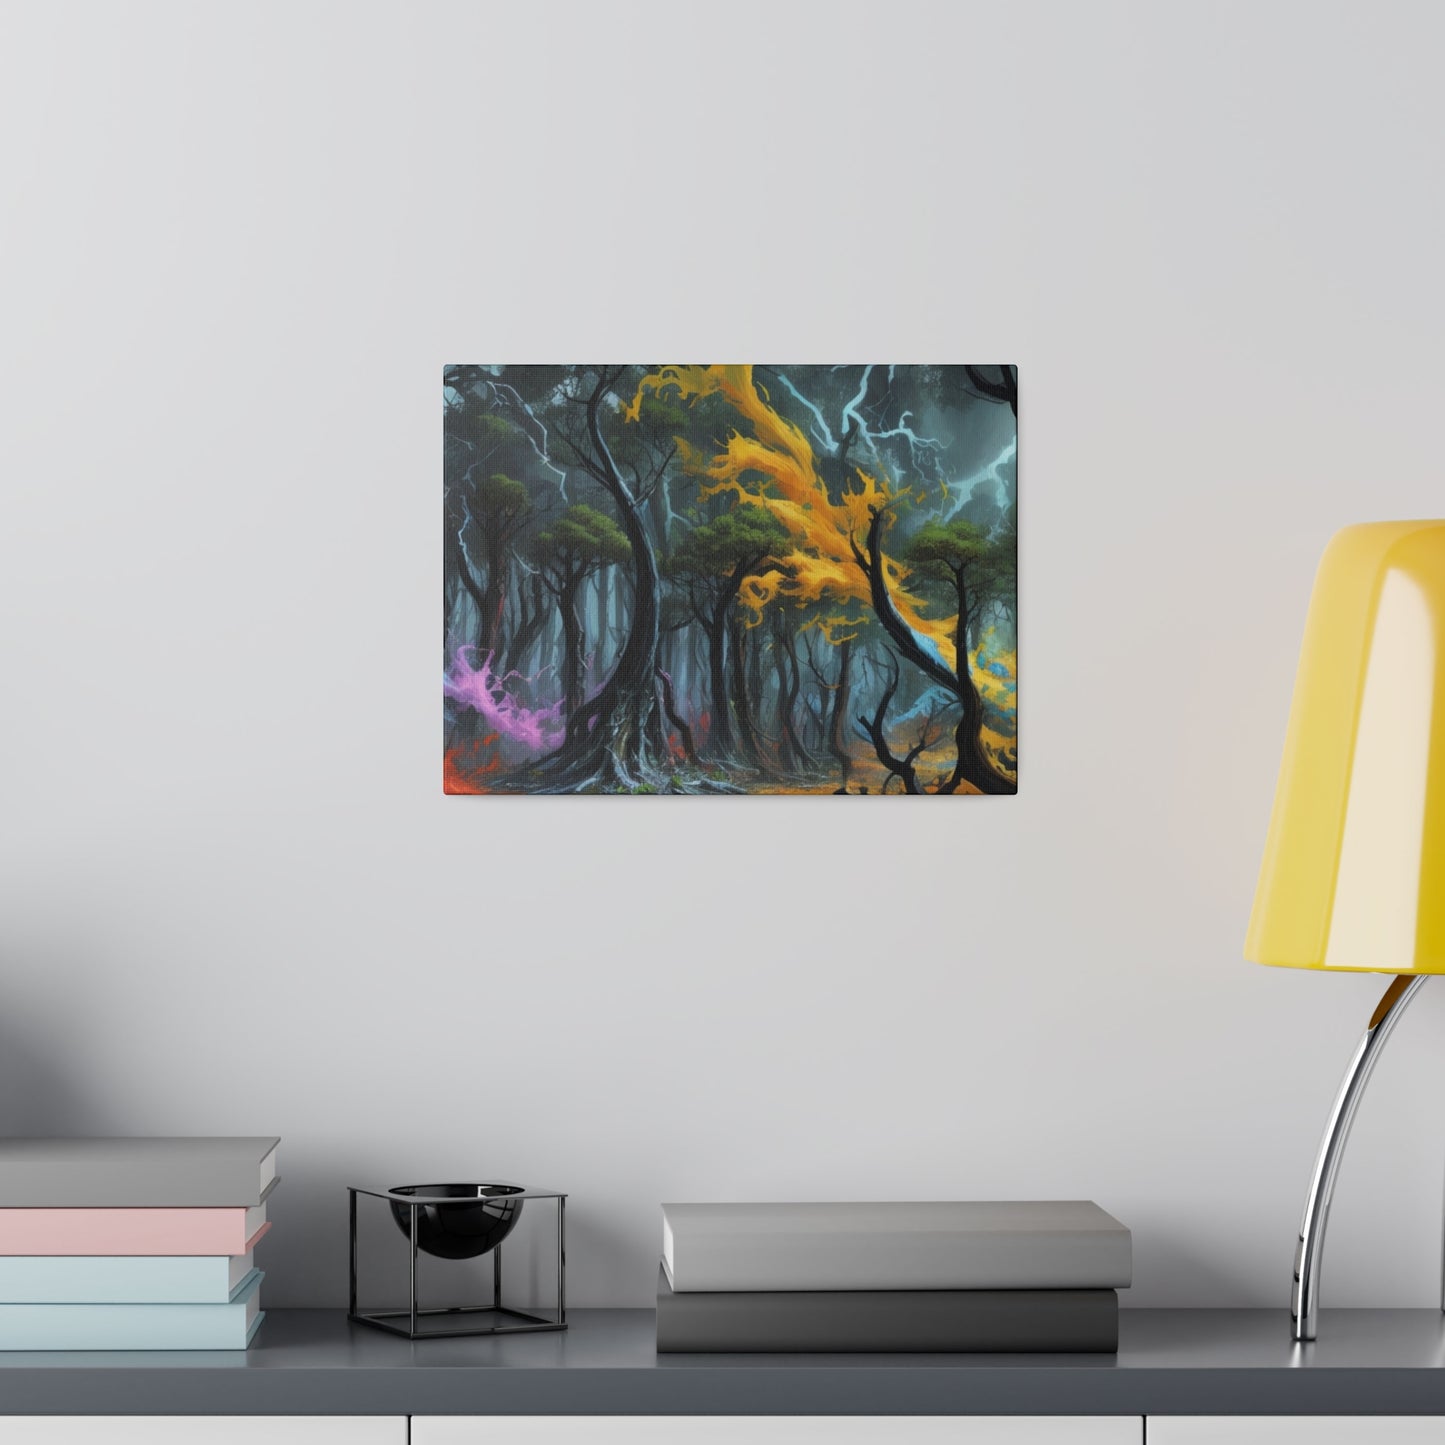 Messy Colourful Bending Trees Artwork - Matte Canvas, Stretched, 0.75"